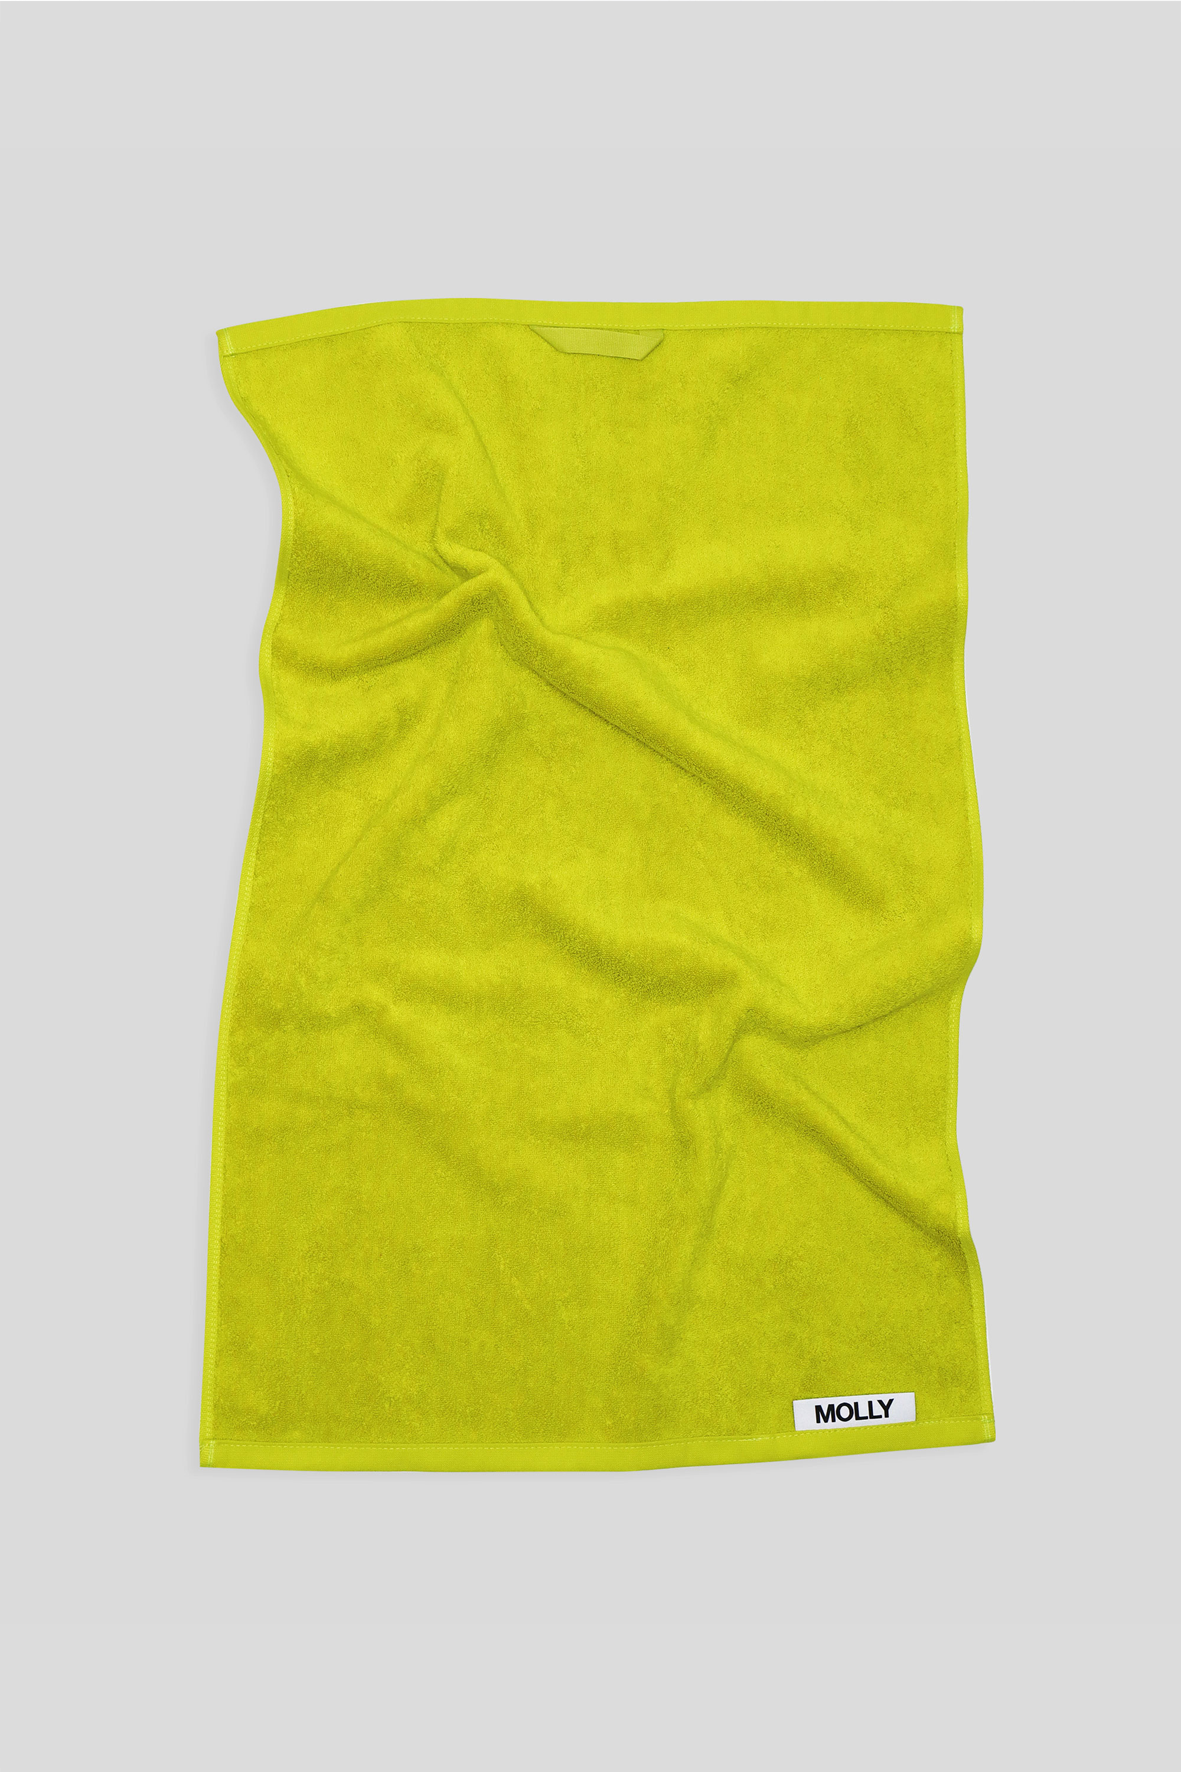 [MOLLY] Signature Towel, Lime